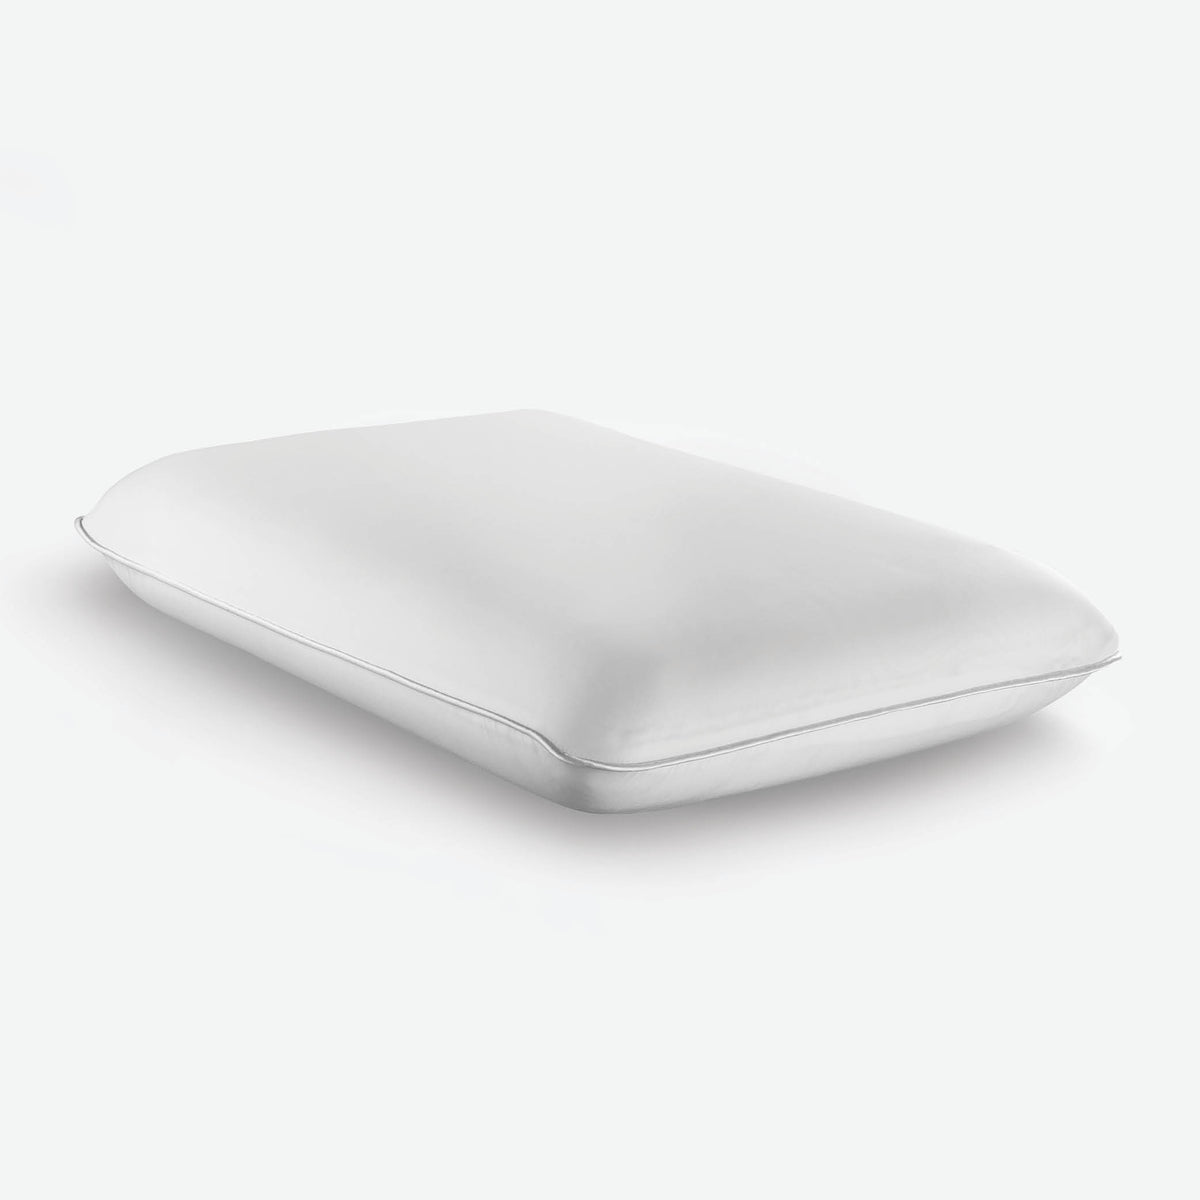 Image of the Cooling Replenish Pillow with the memory foam side facing up on a white background